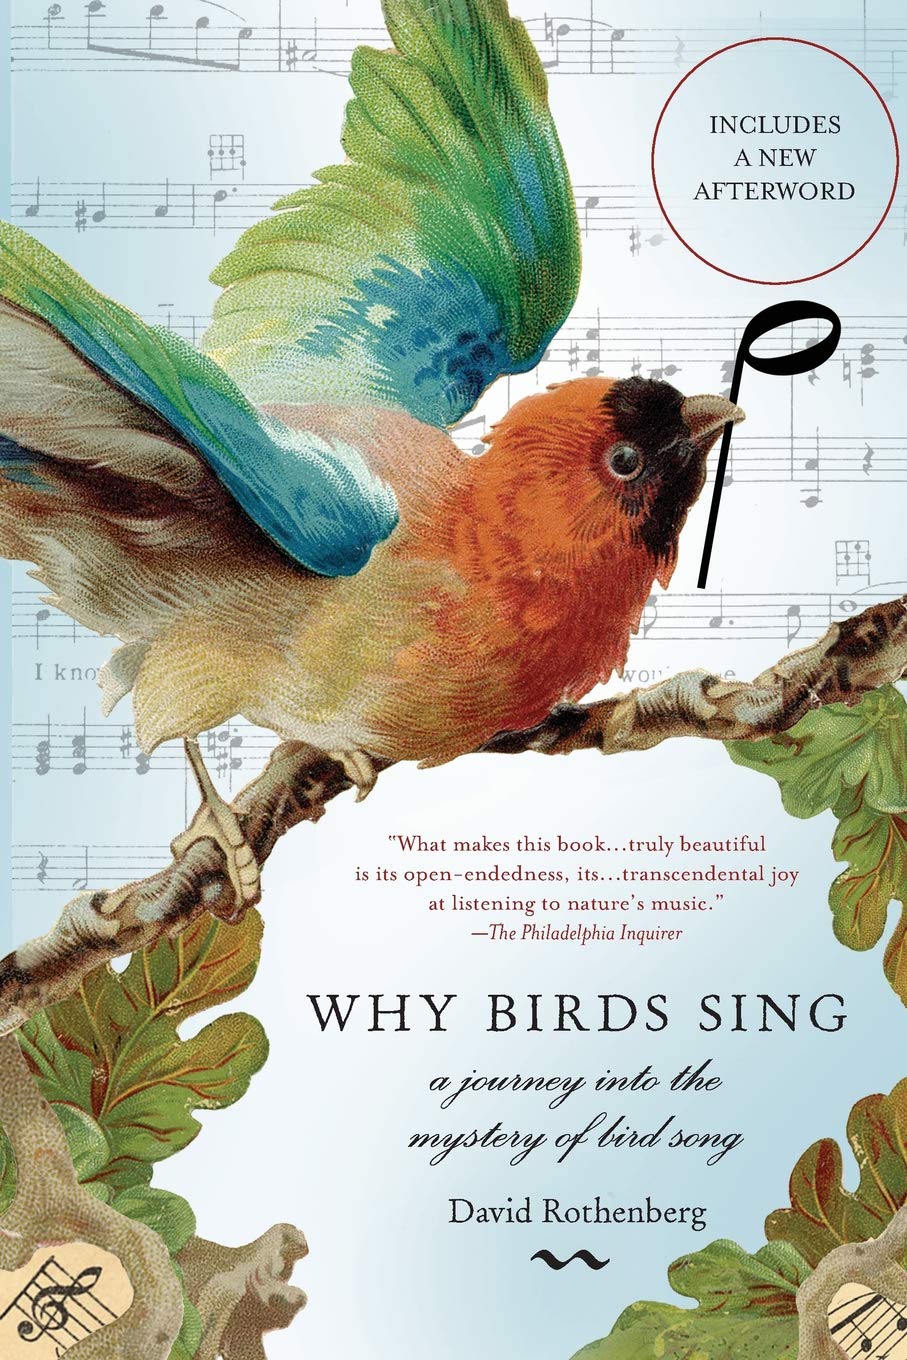 Why Birds Sing: A Journey Into the Mystery of Bird Song